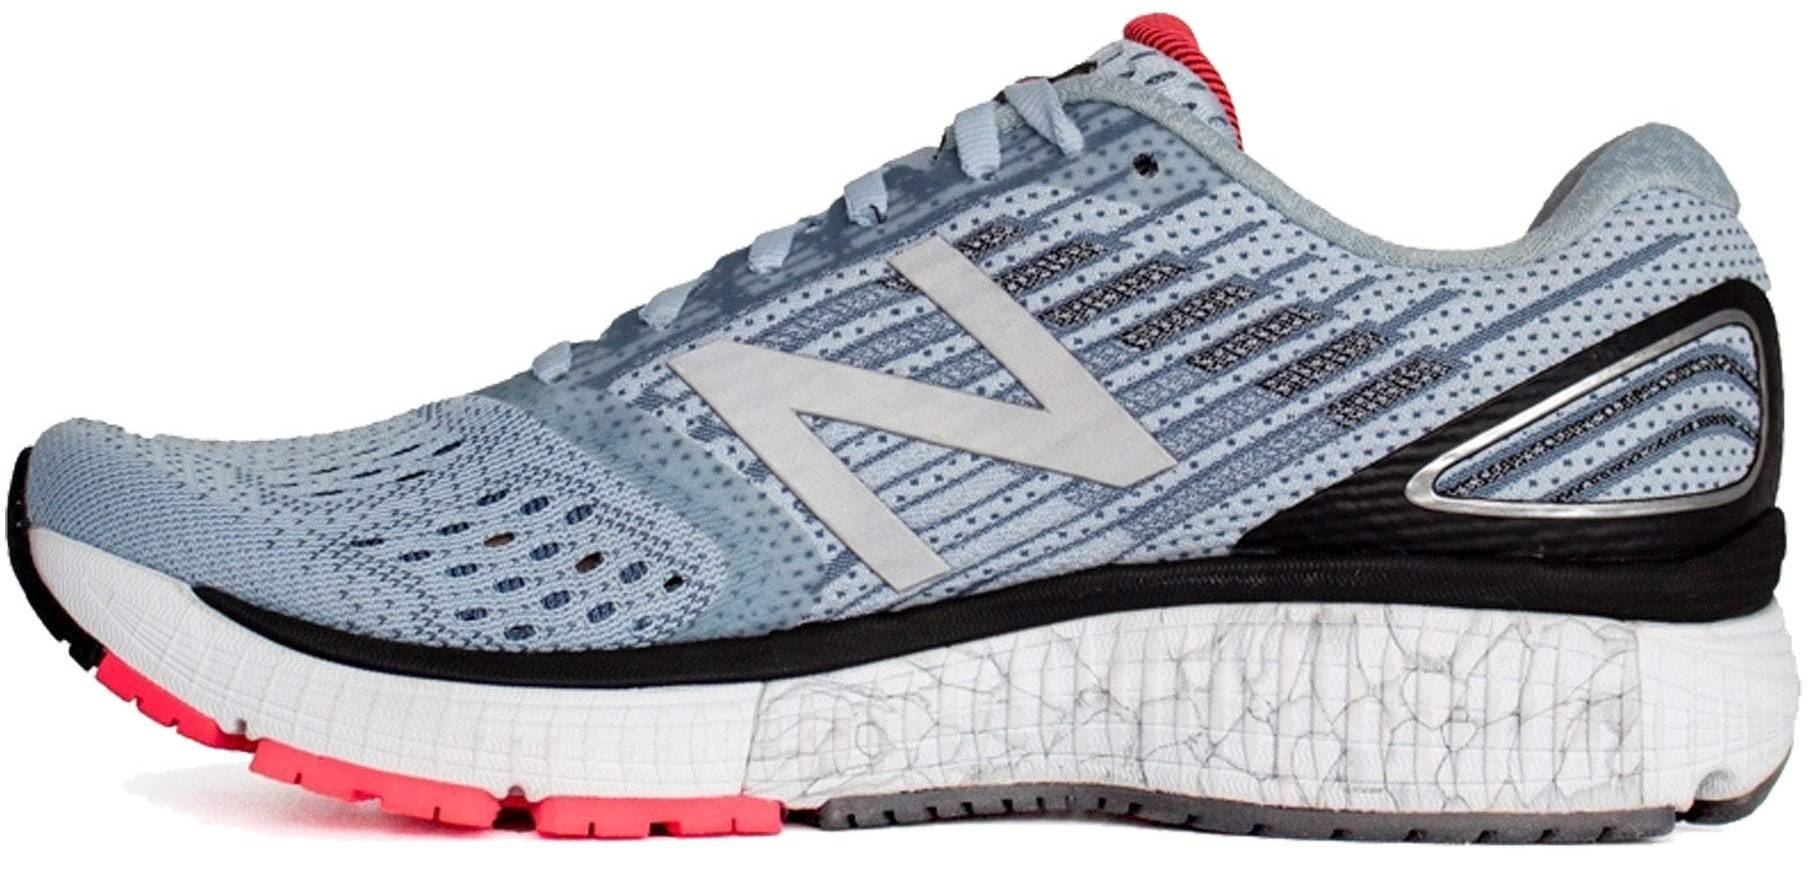 Only $62 + Review of New Balance 860 v9 